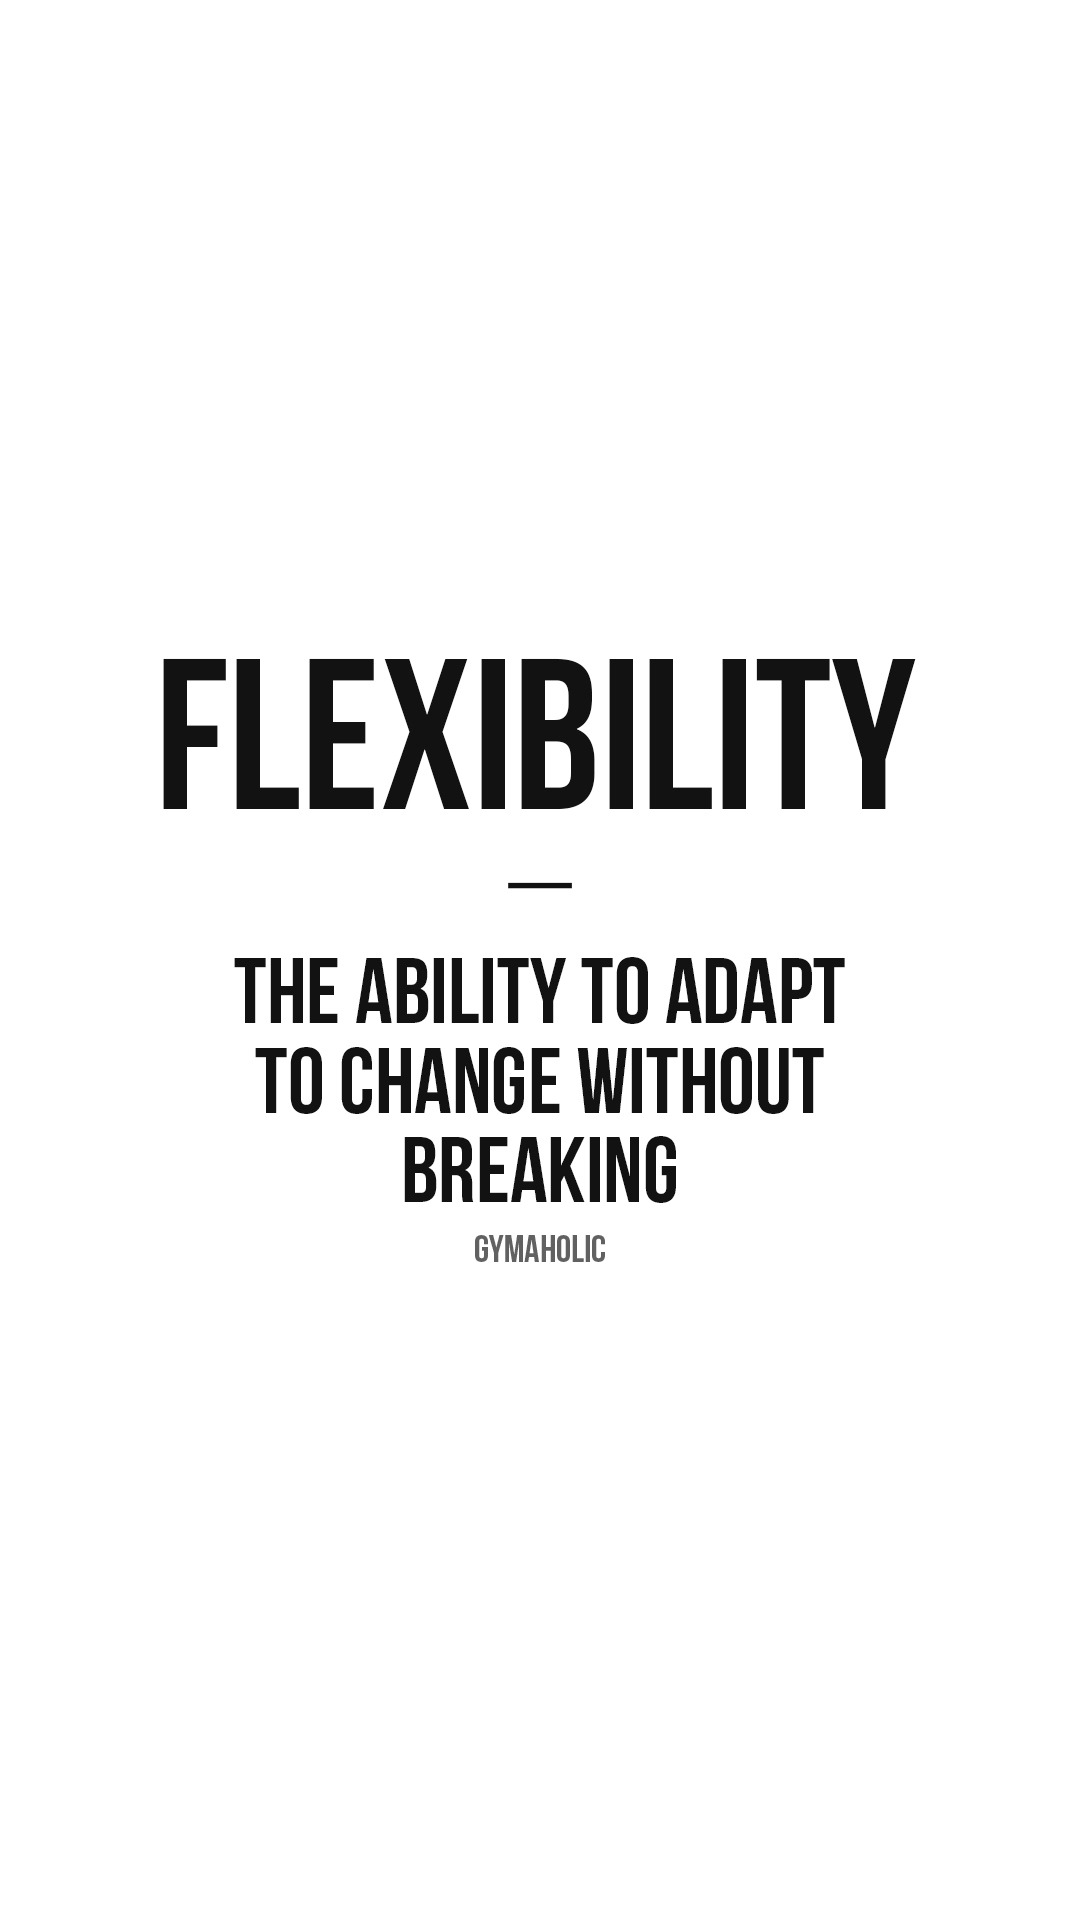 Flexibility: the ability to adapt to change without breaking